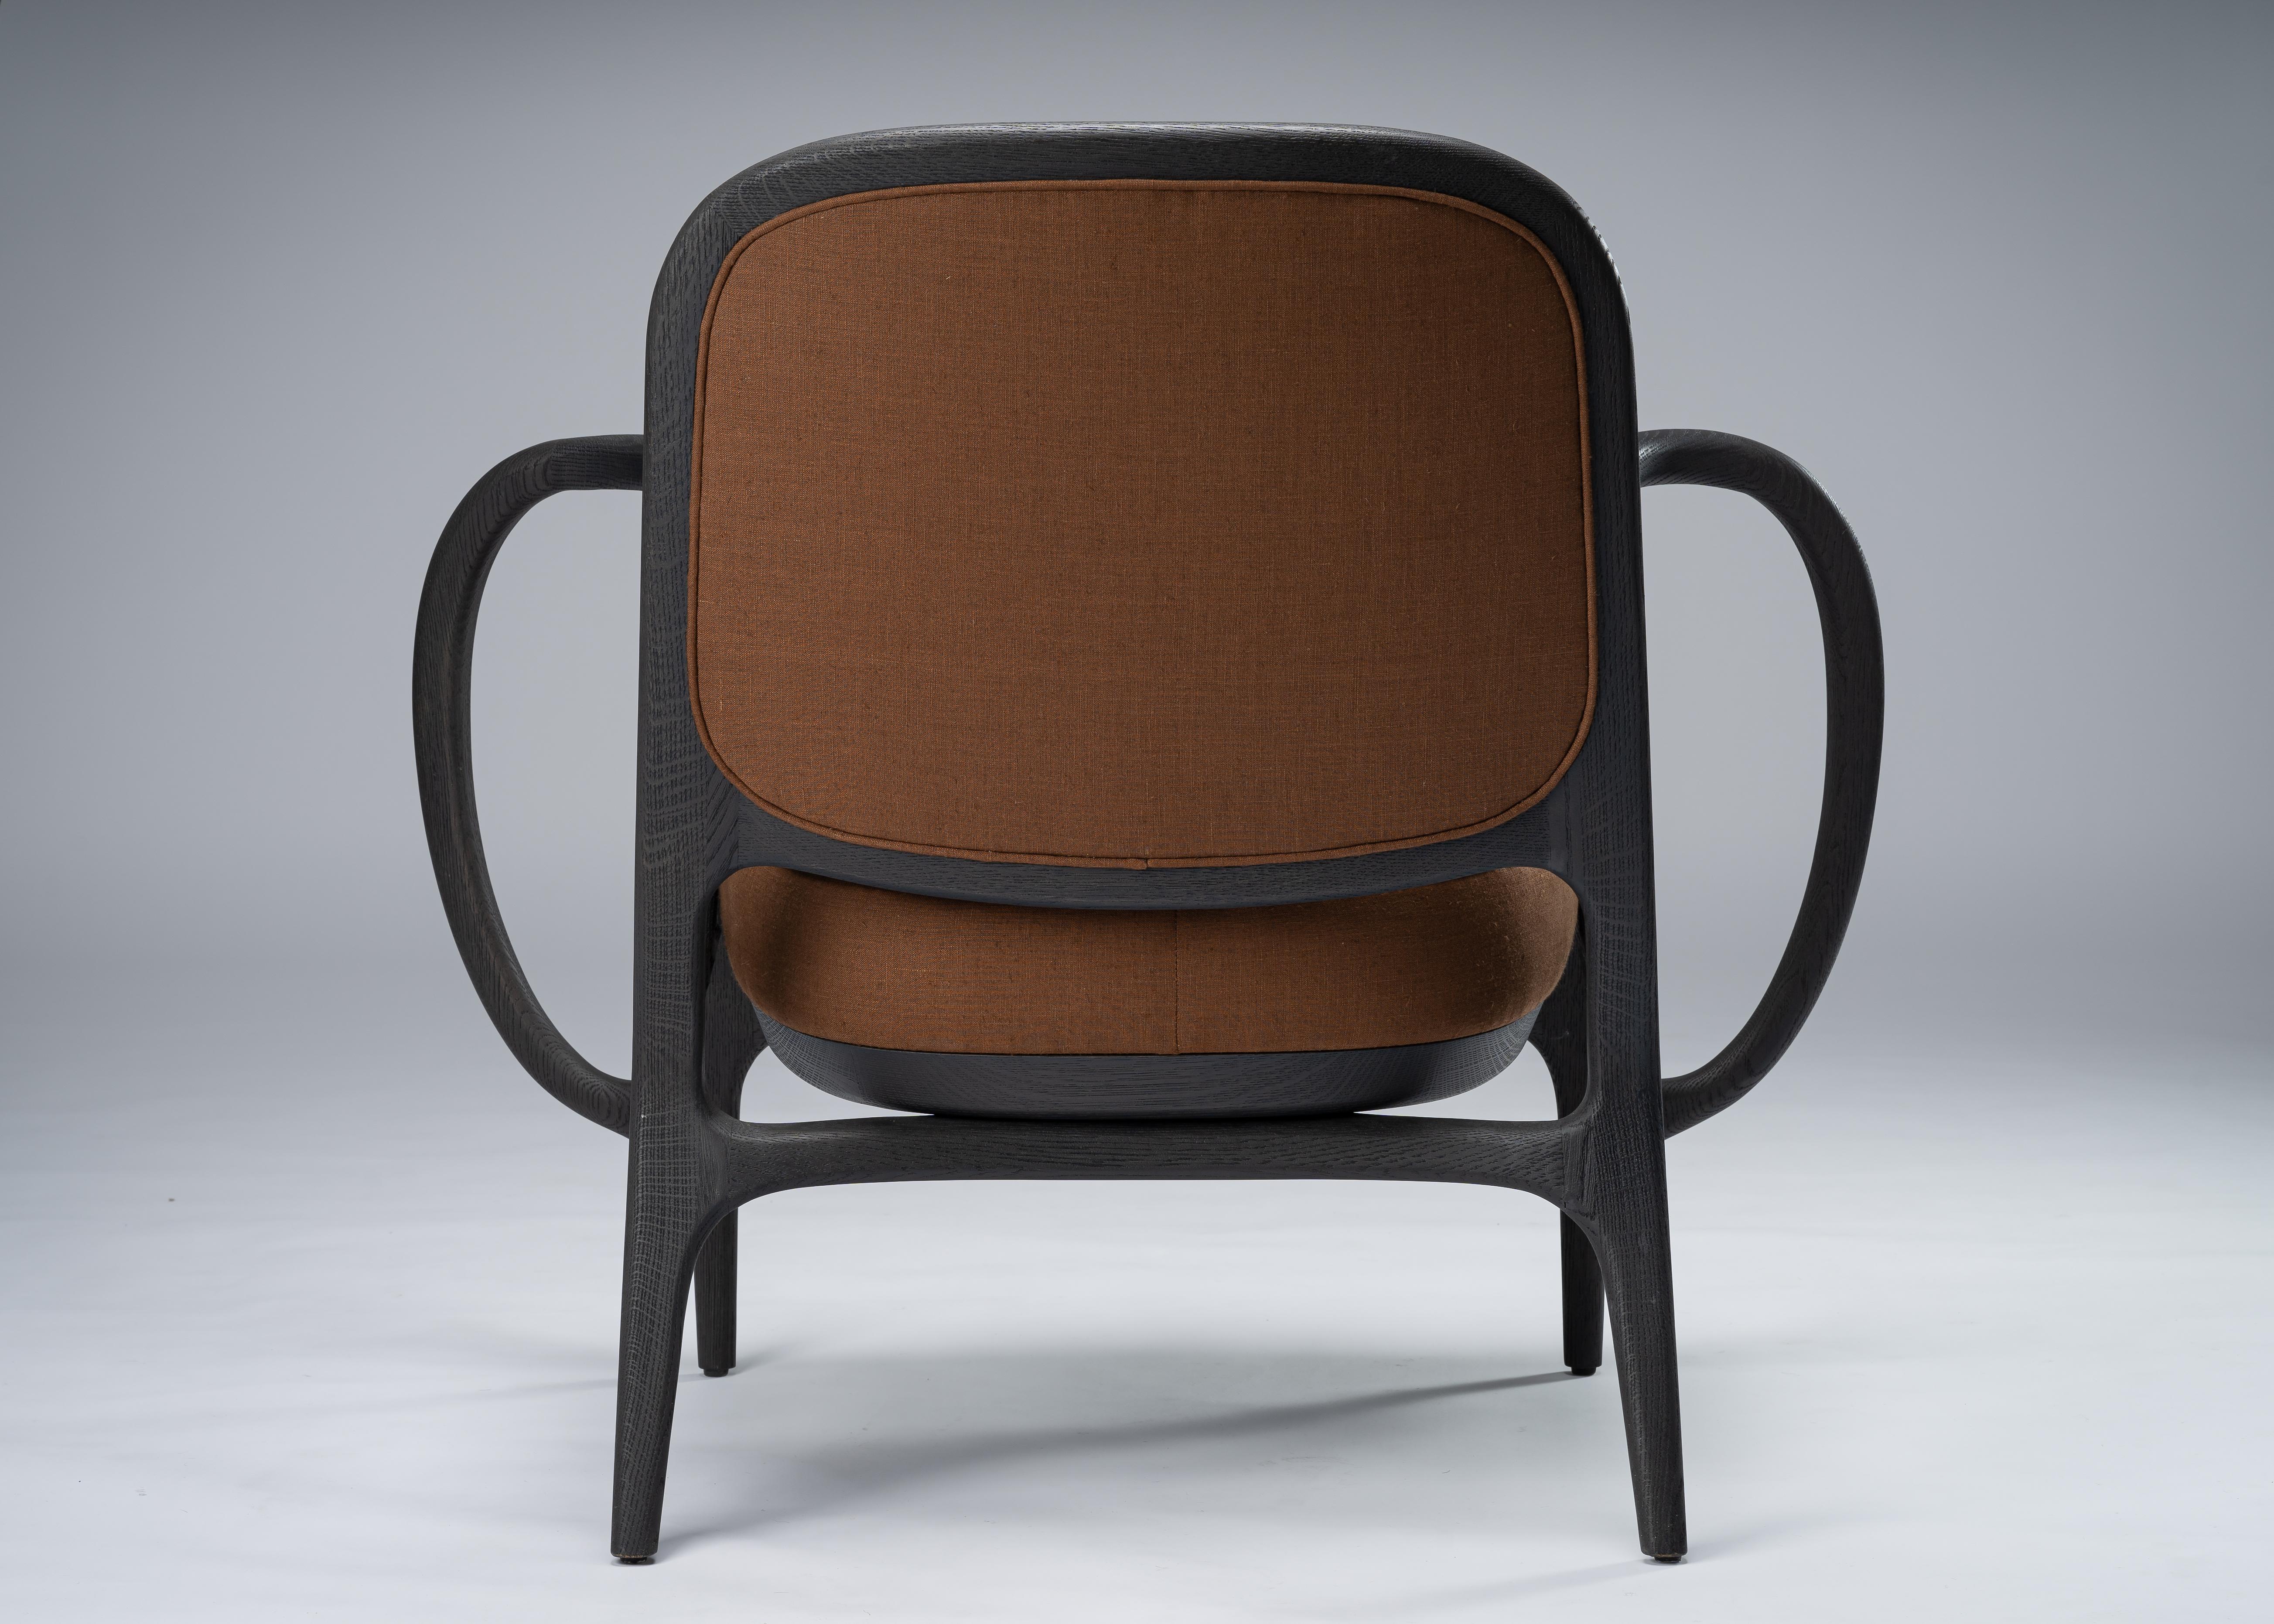 American Vintage Tobacco Linen Chair / Armchair in Sandblasted Oak, Black/Charcoal Stain